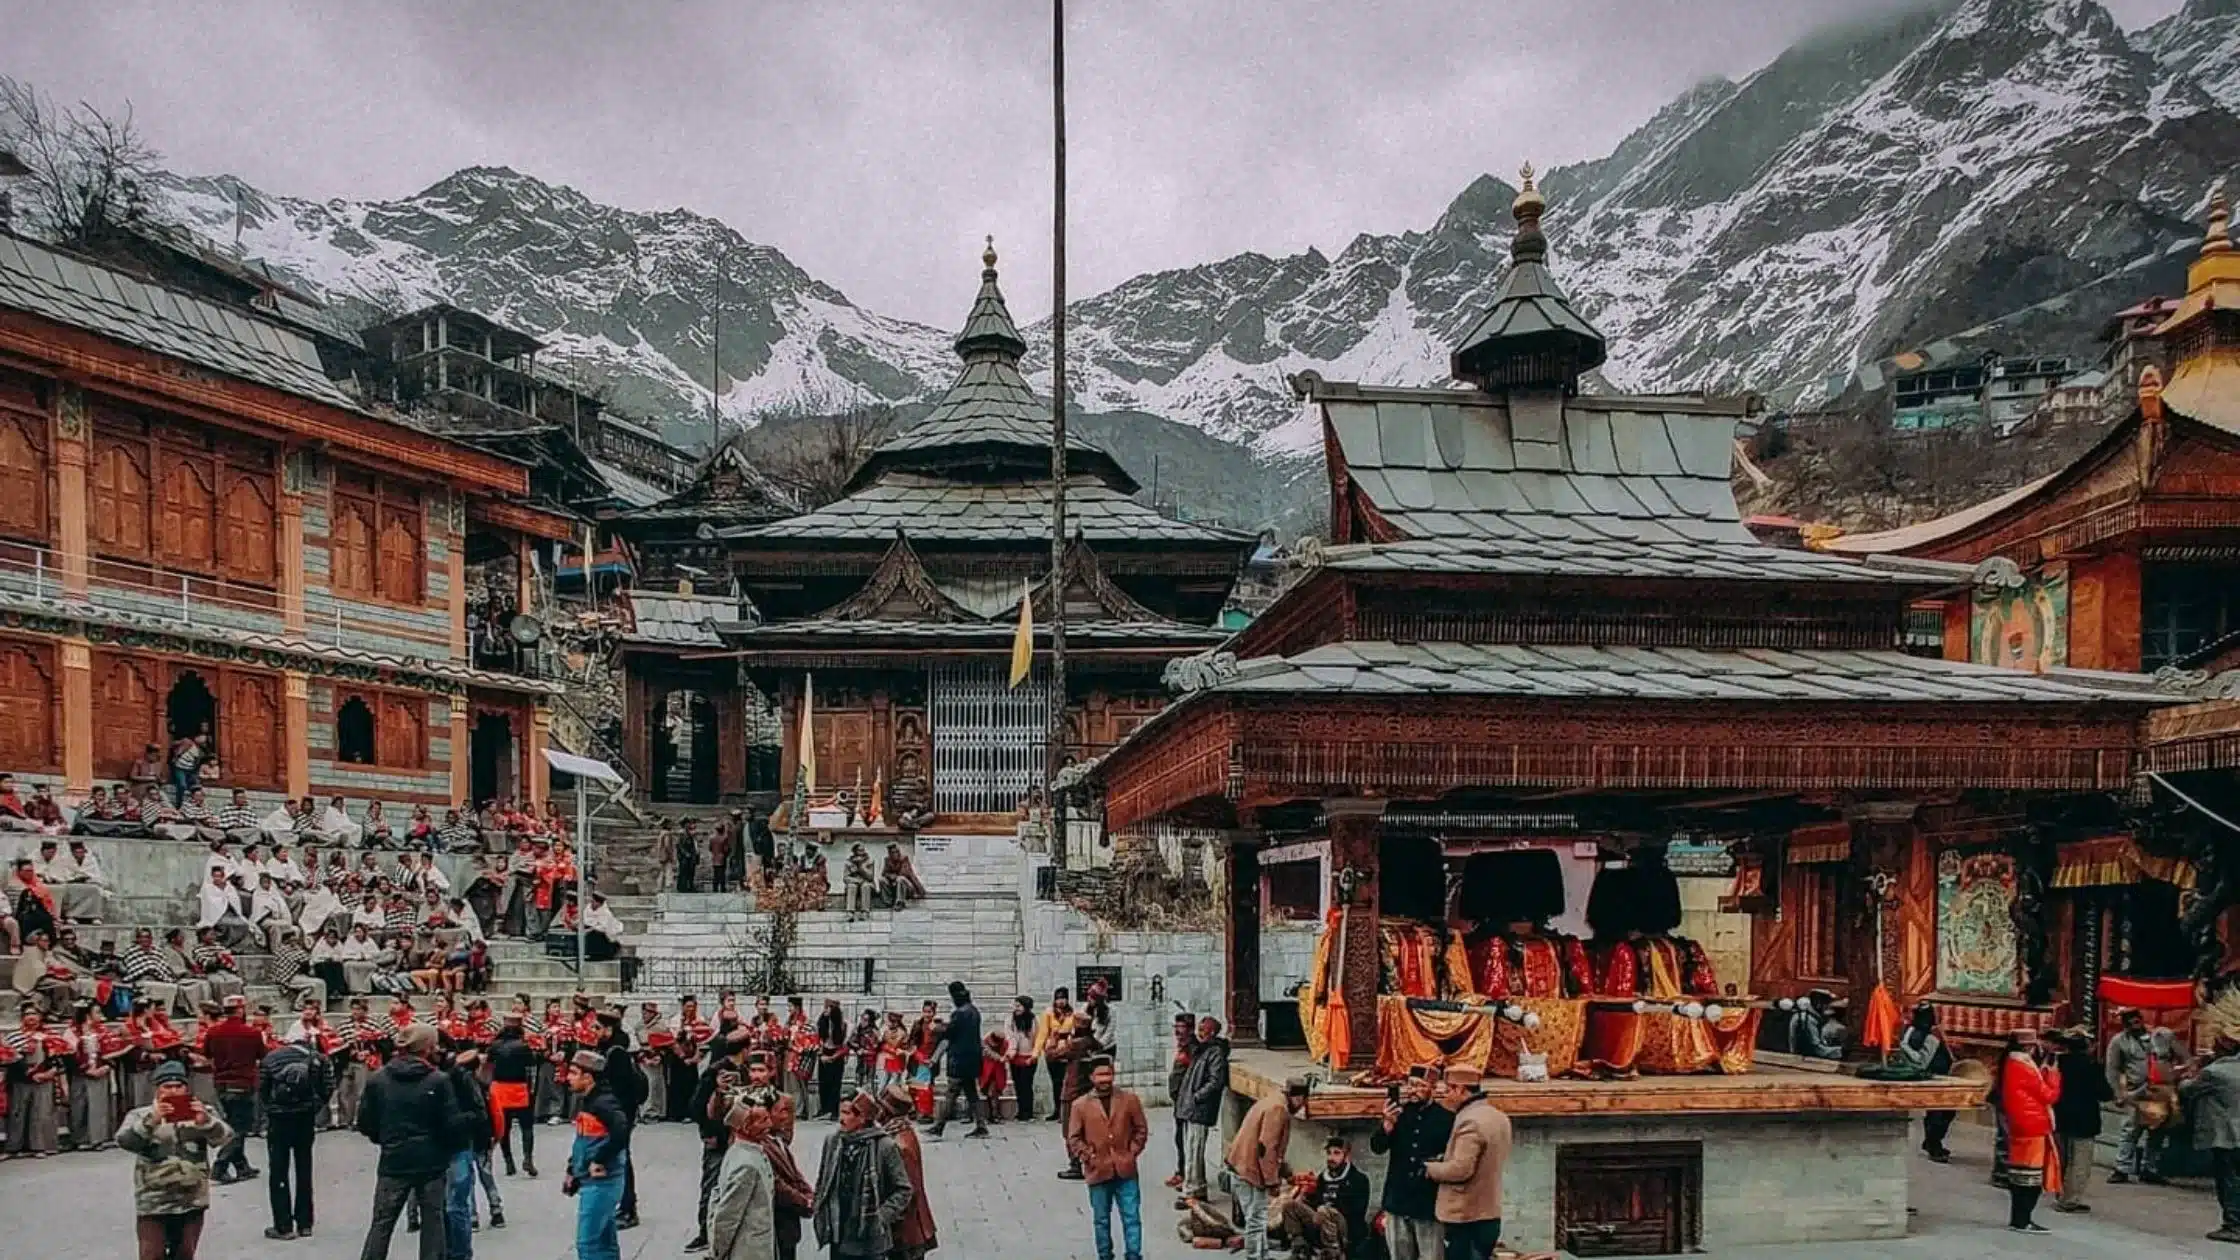 This Year Head To Sangla, a Picturesque Valley Of Himachal Pradesh To Celebrate Holi, The Most Colorful Festival In India